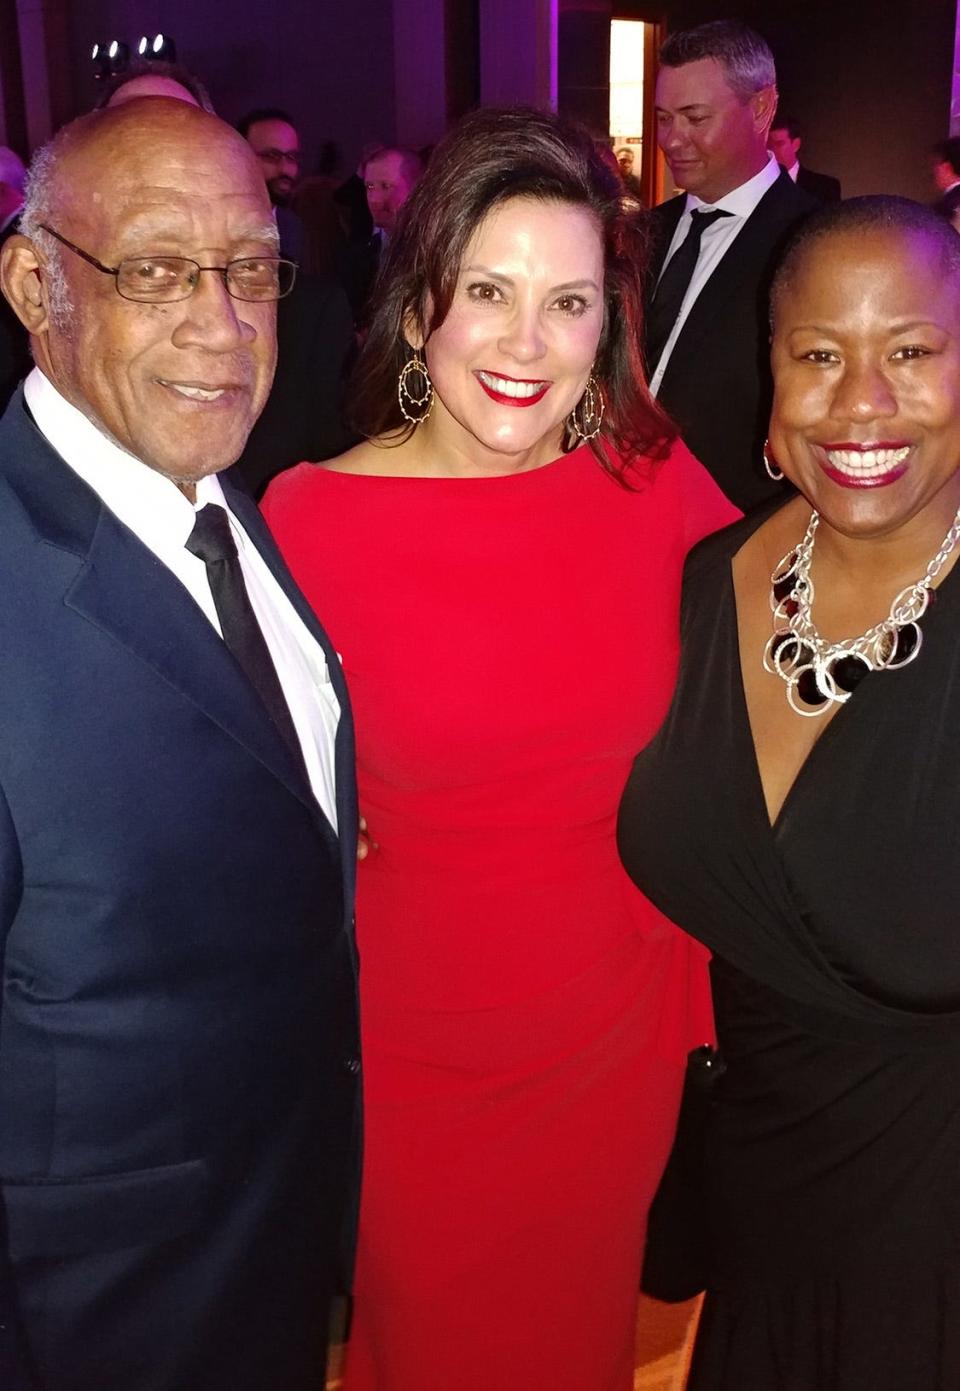 Dr. Arthur Divers shares a moment with Gov. Gretchen Whitmer and his daughter Sheri Divers during the 2019 inaugural ball at Cobo Center. Dr. Divers' longtime civic service record has included being a Precinct Delegate in the 14th Democratic Congressional District.